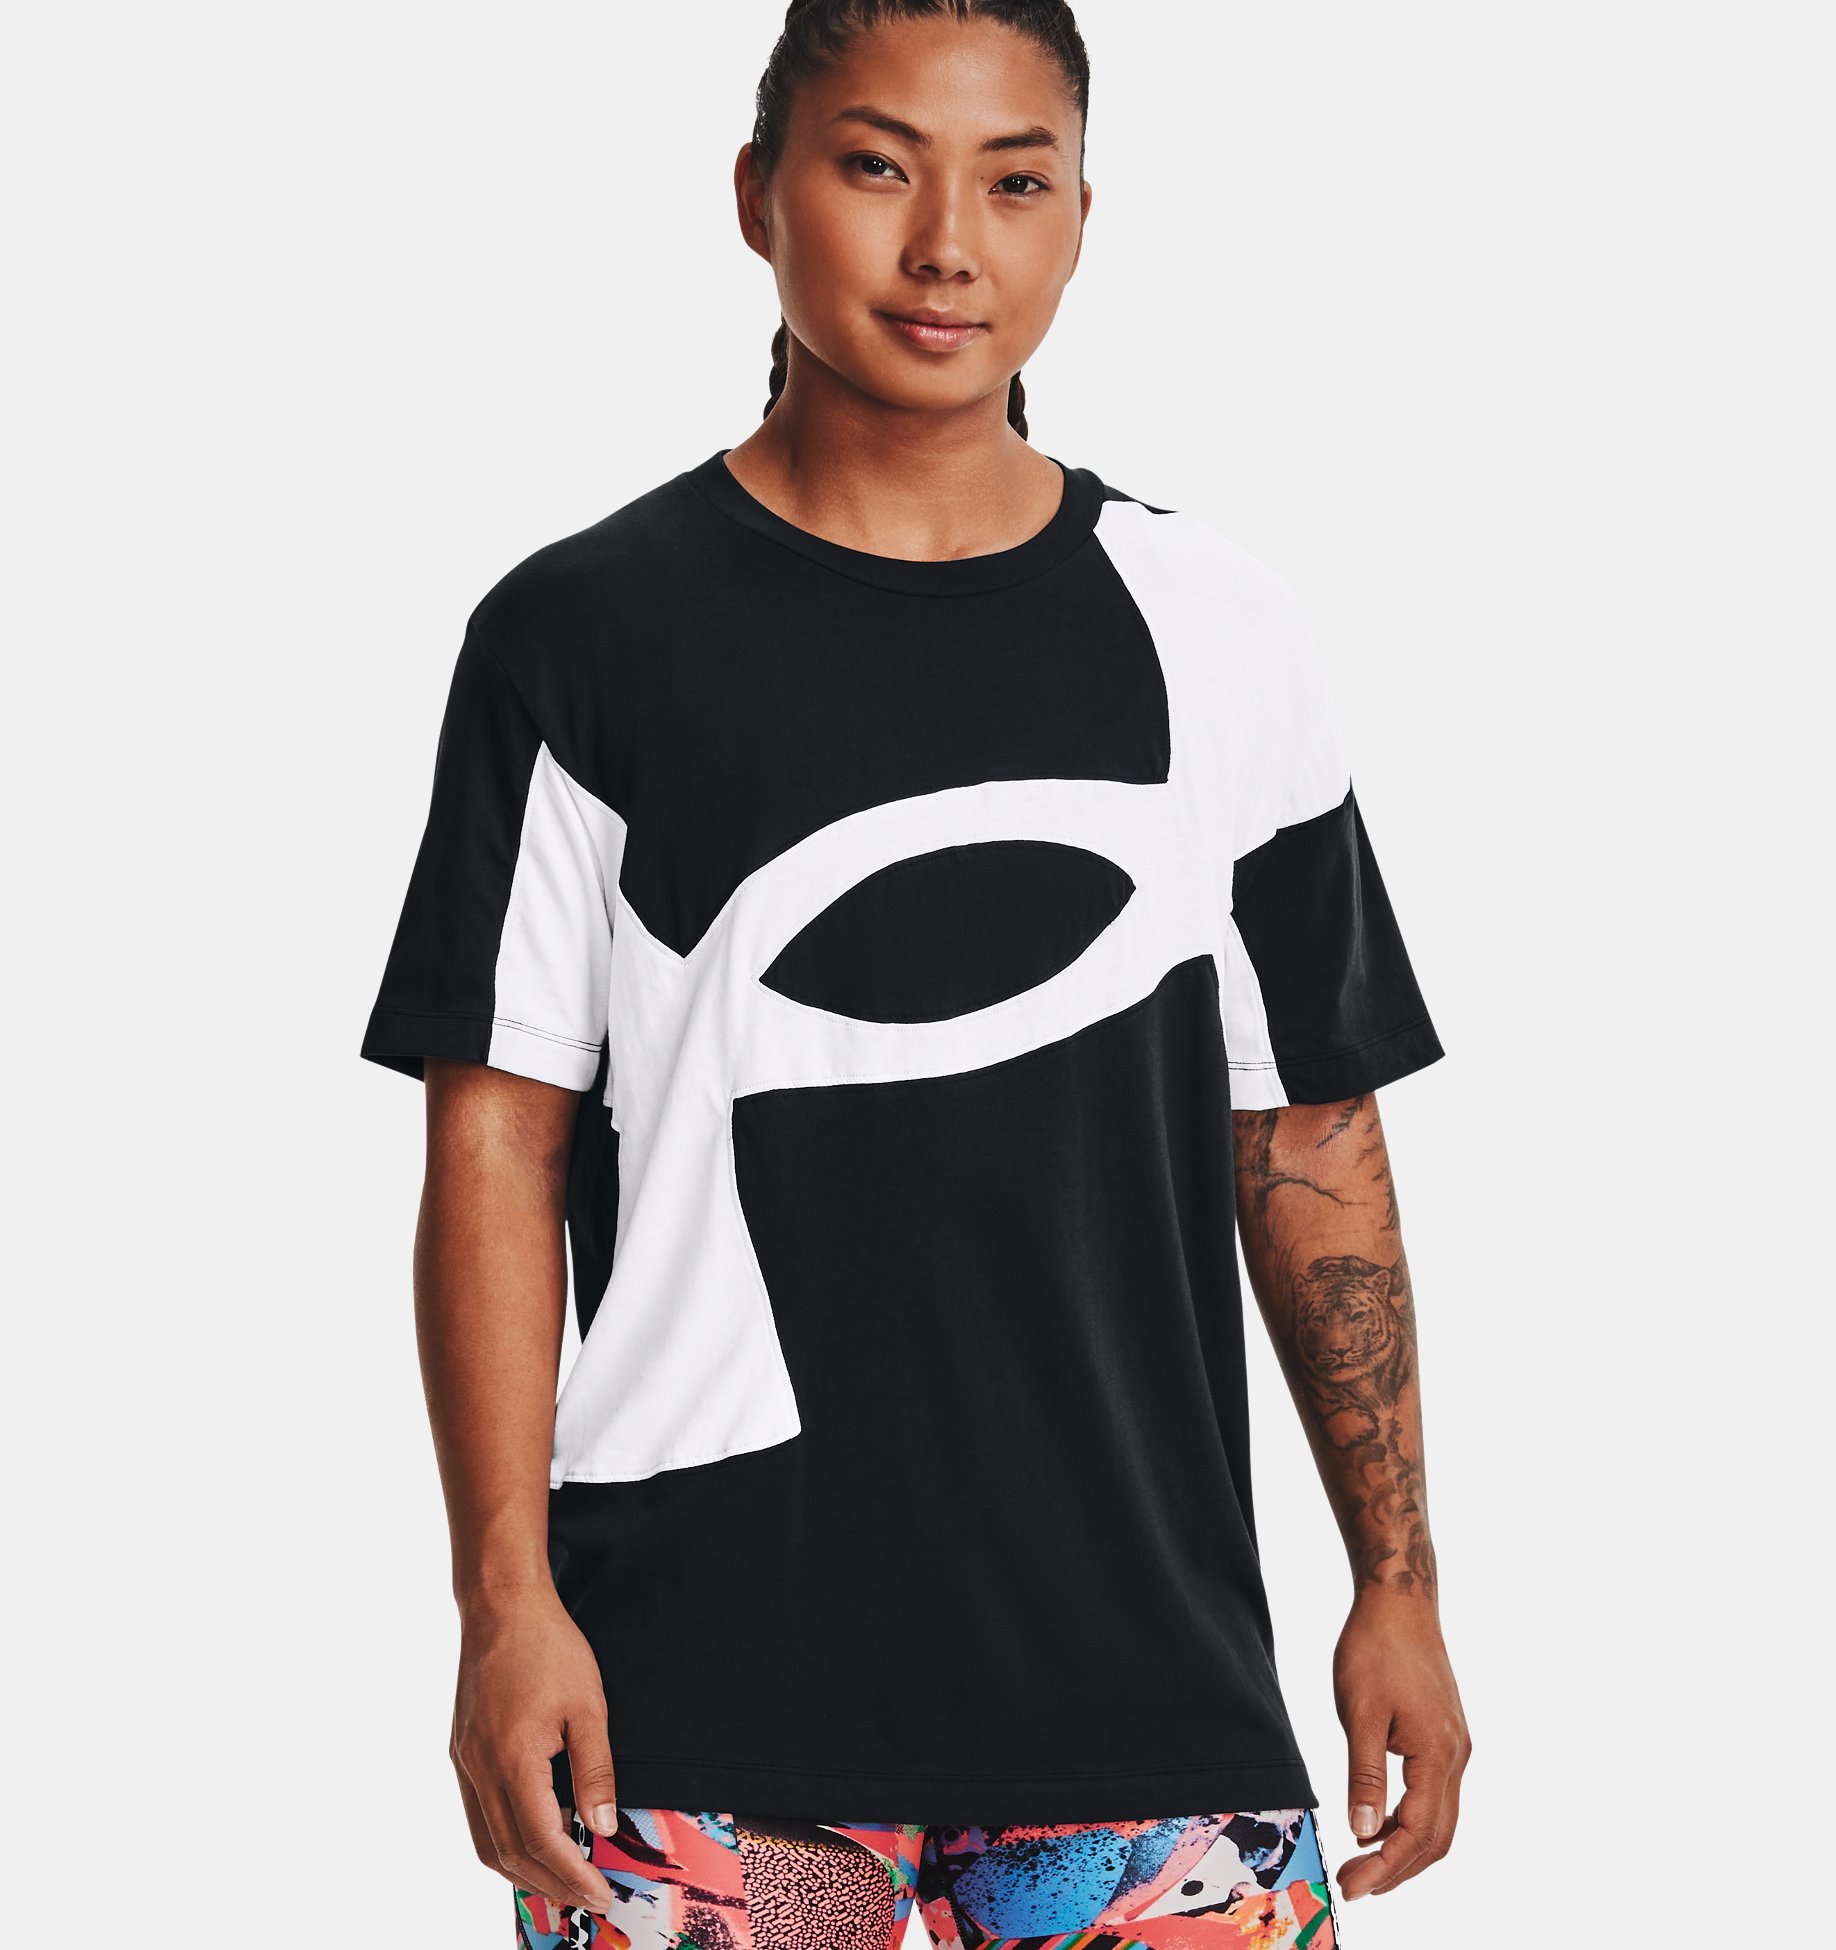 Remera Live Graphic Pre Fall SS para mujer